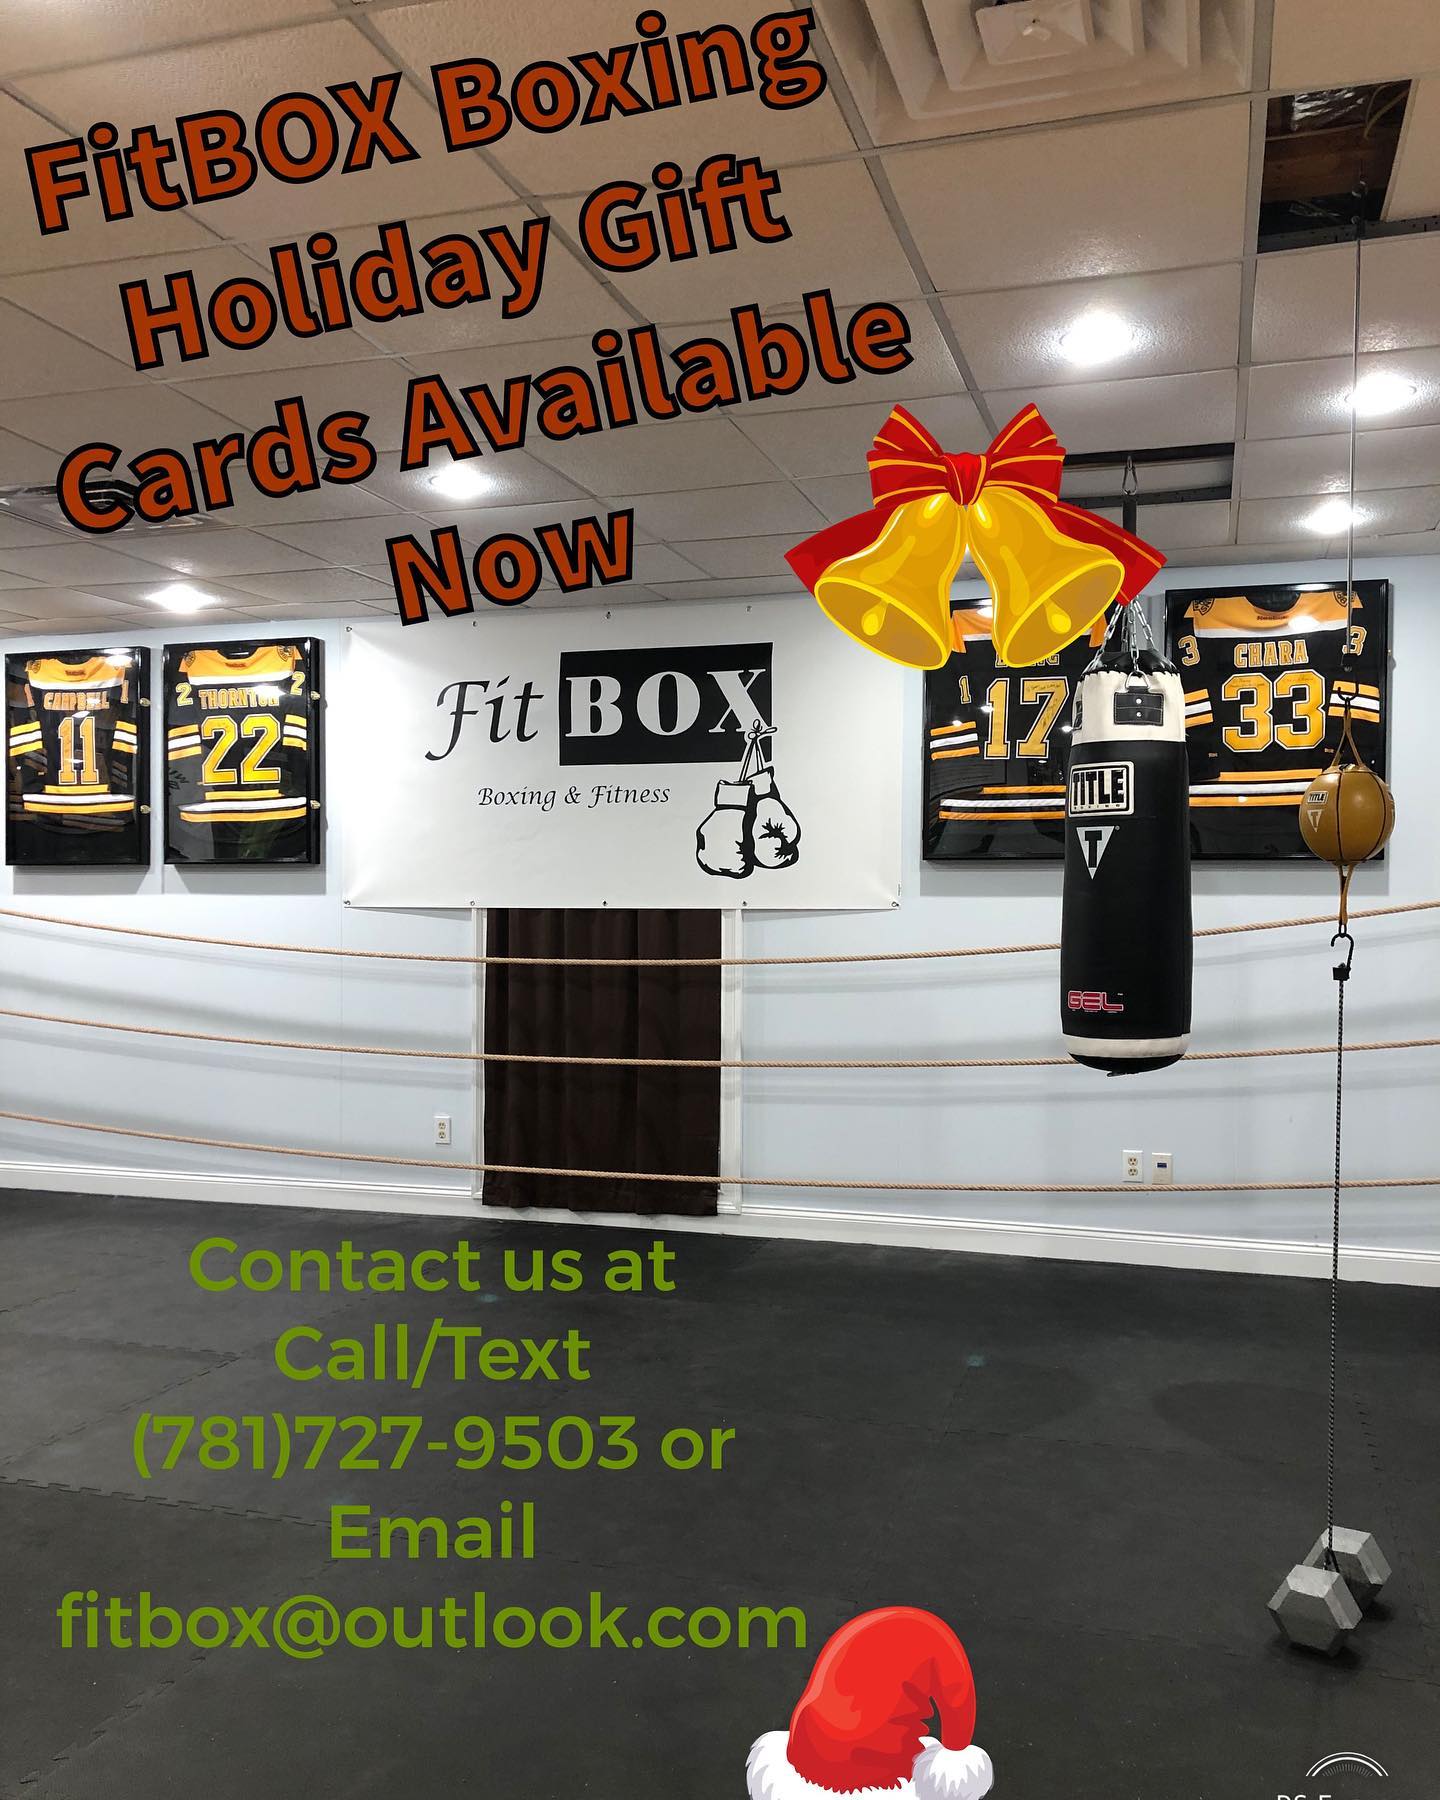 The way this 2020 has been for all of us what better gift to give then the gift that keeps on giving... Boxing Workouts.  www.Fitboxdedham.com
@tommymcinerney